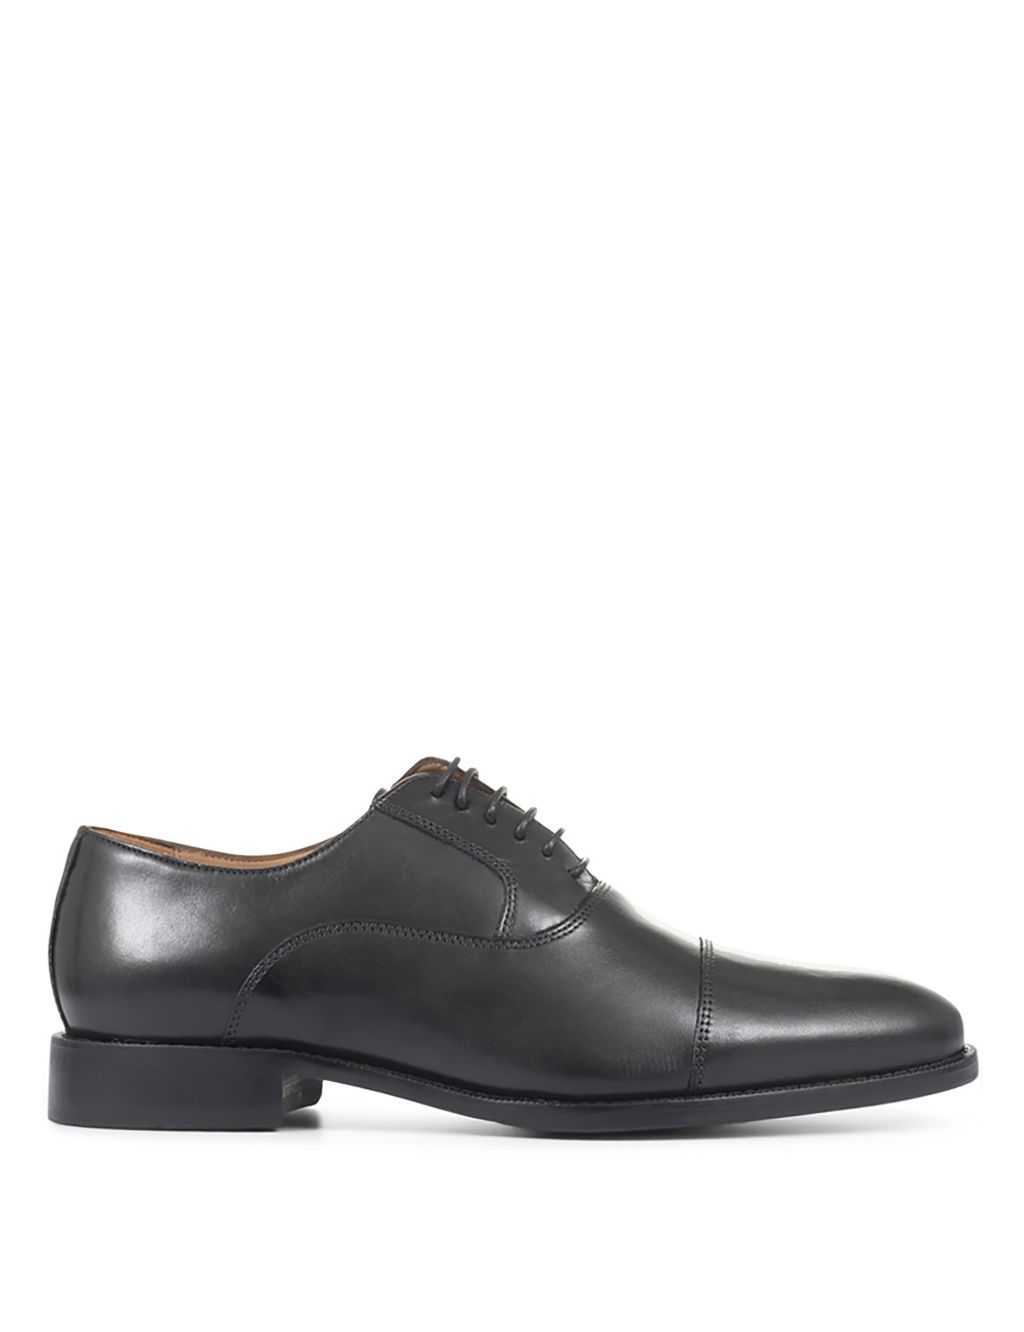 Leather Oxford Shoes image 5